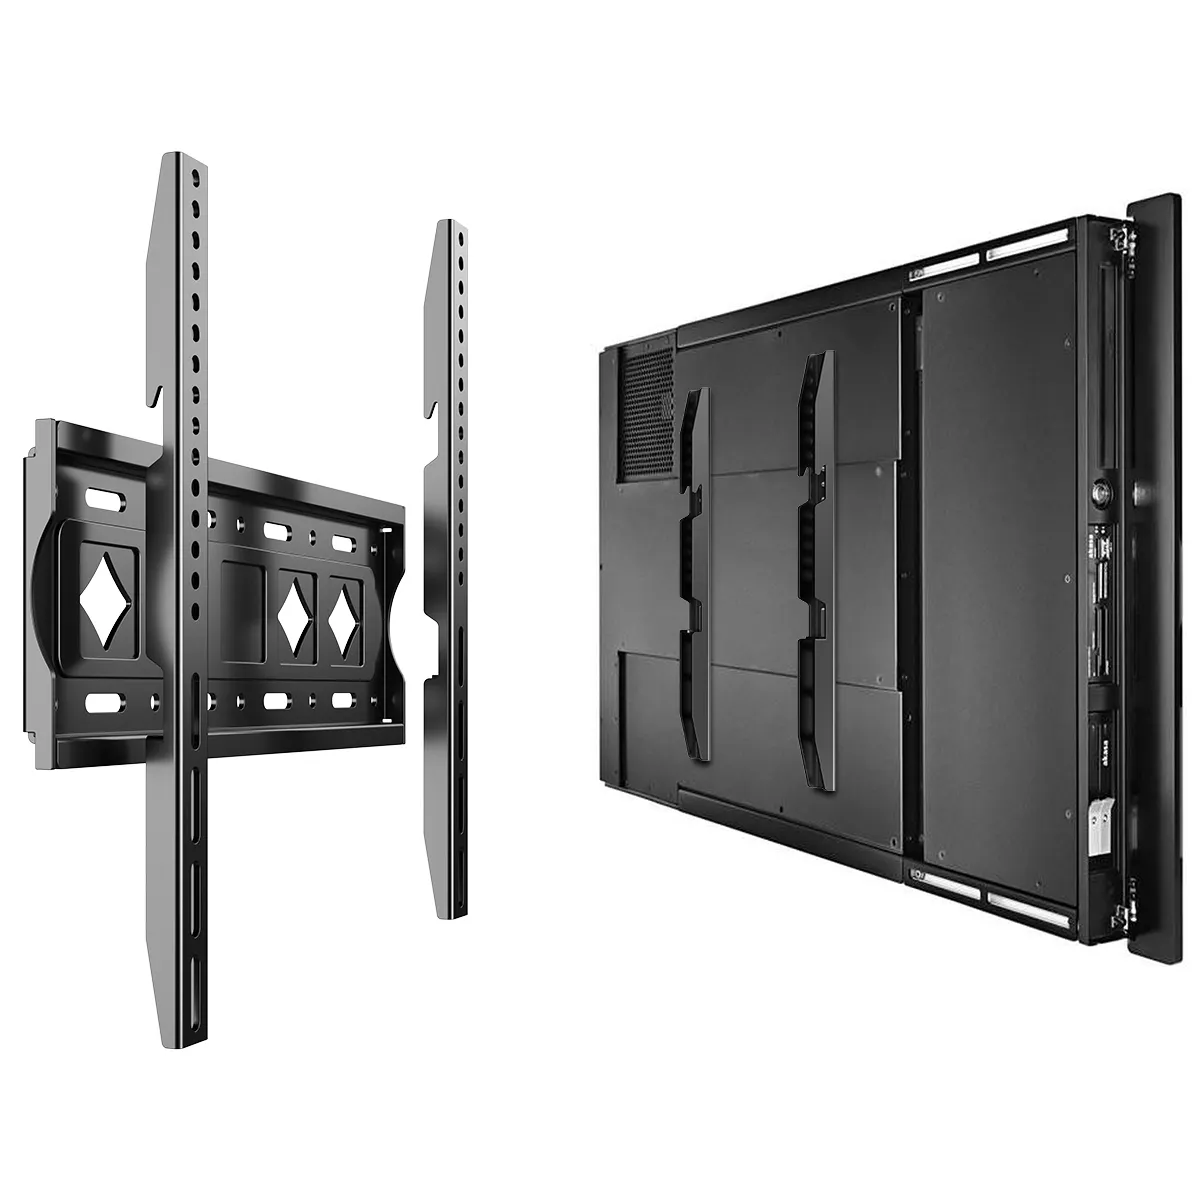 High Quality Supplier LCD LED TV Bracket Wall Mount for Universal Television Plasma Flat Screen 26-65 inch